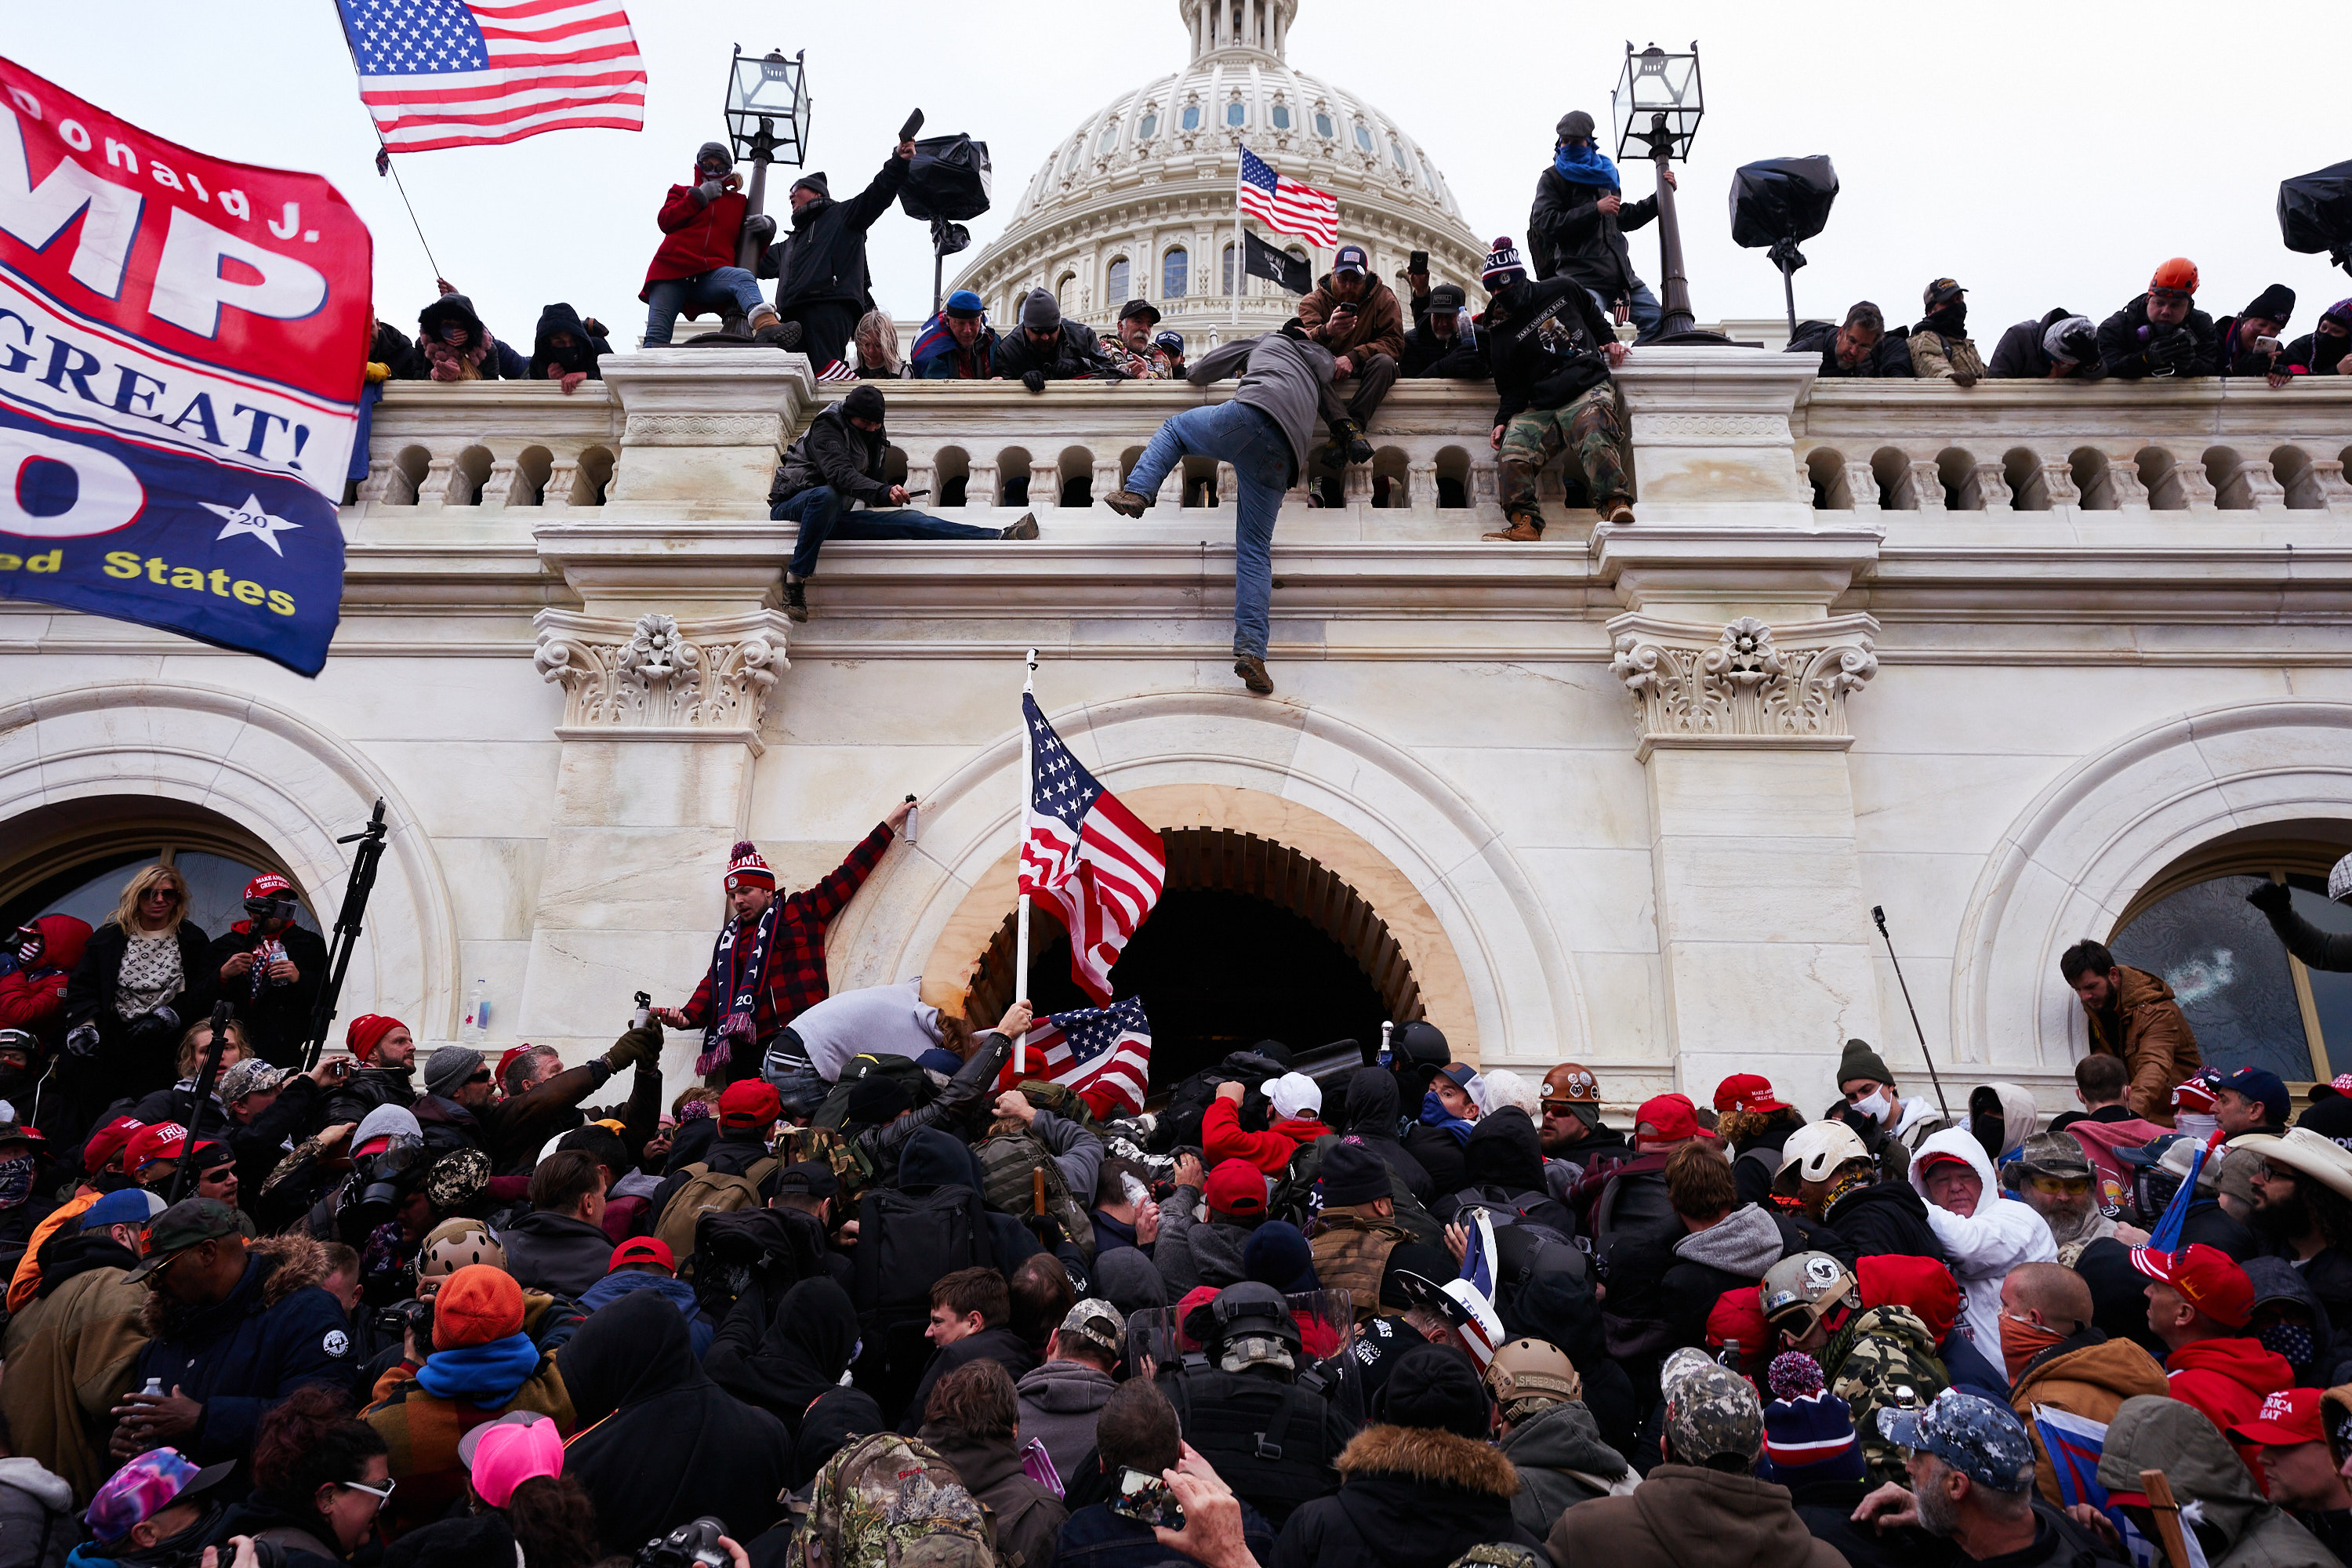 Demonstrators clash with police at US Capitol